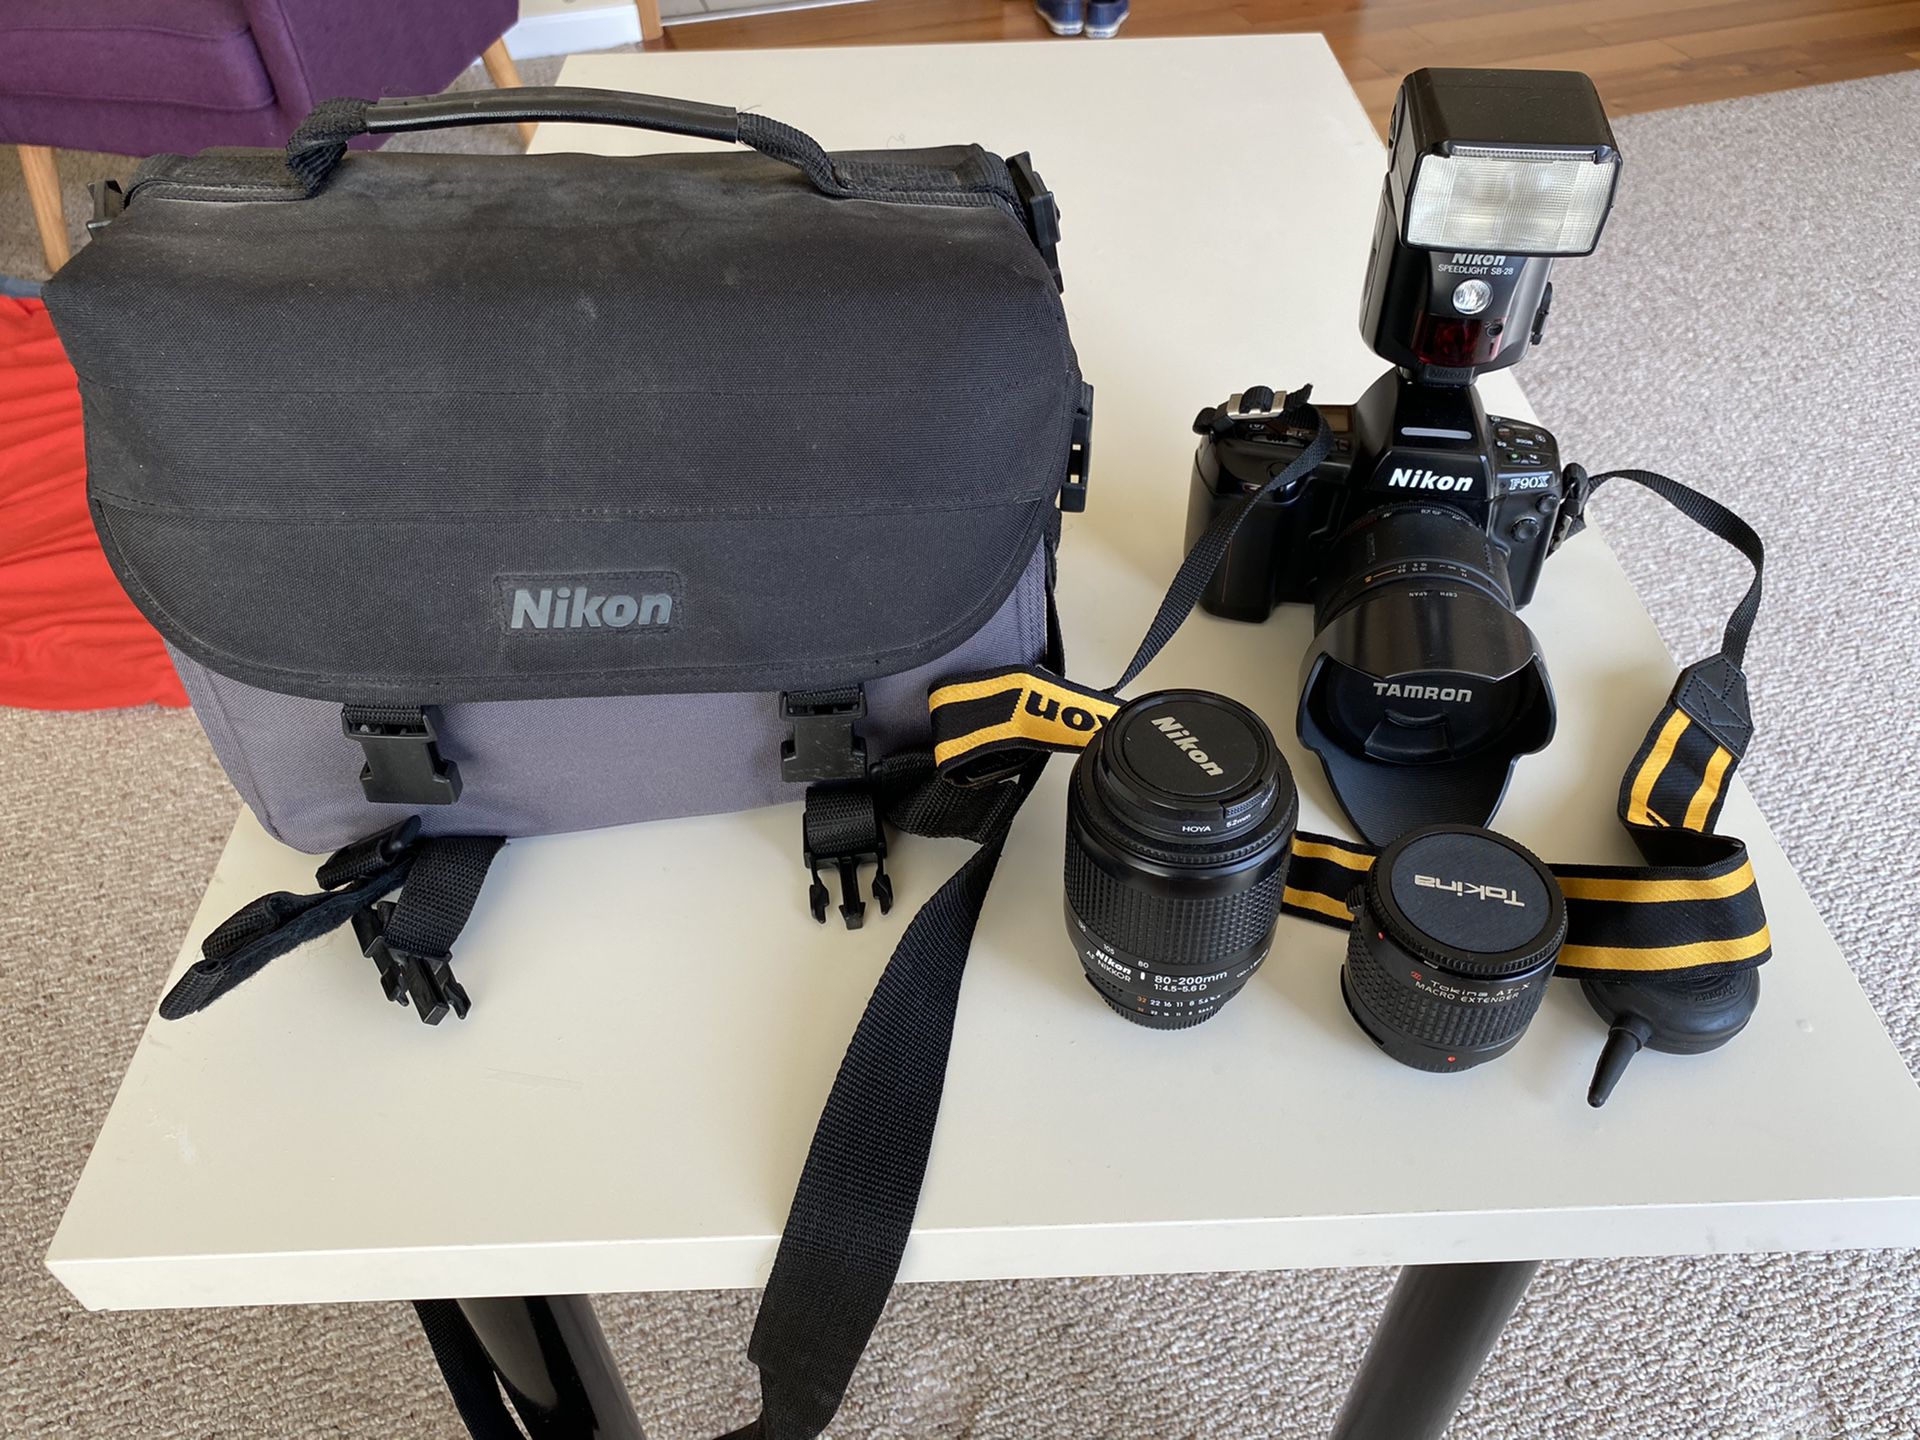 Nikon F90X film camera with lenses and accessories